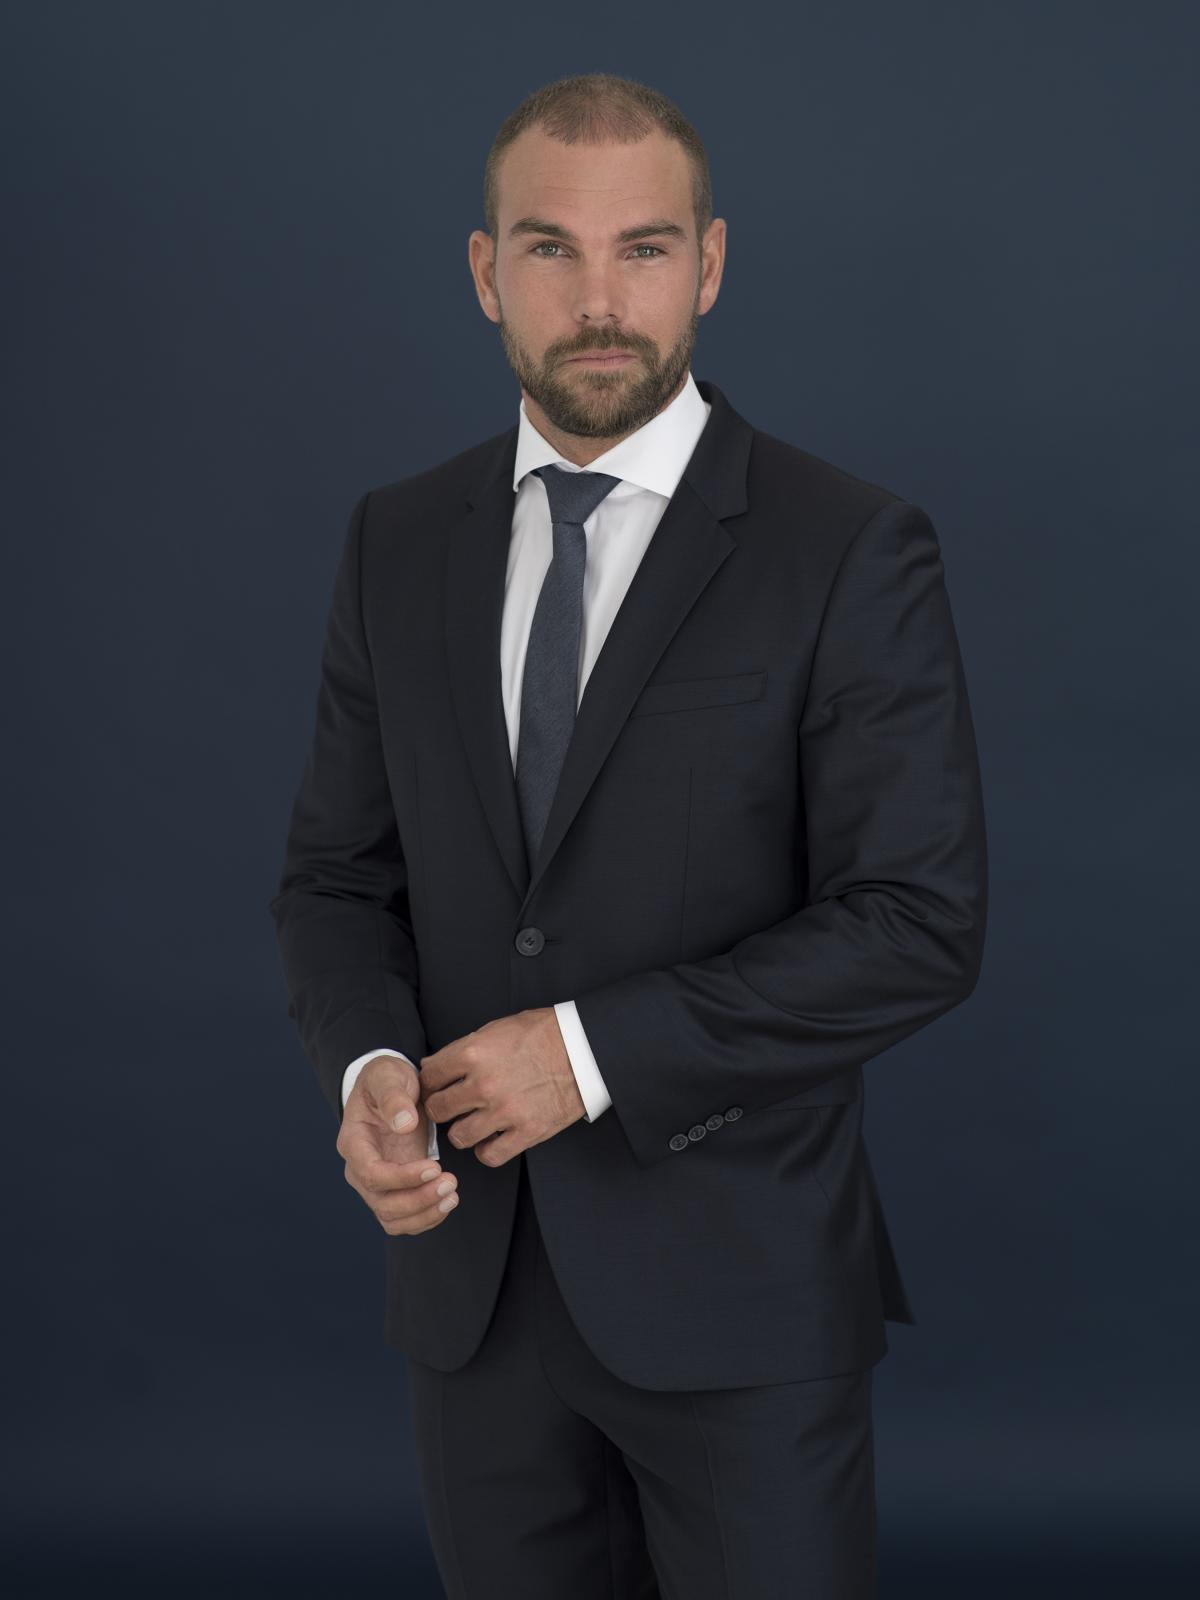 Rémy Ribbe - Attorney contract law and labour law Zurich - Attorney-at-Law